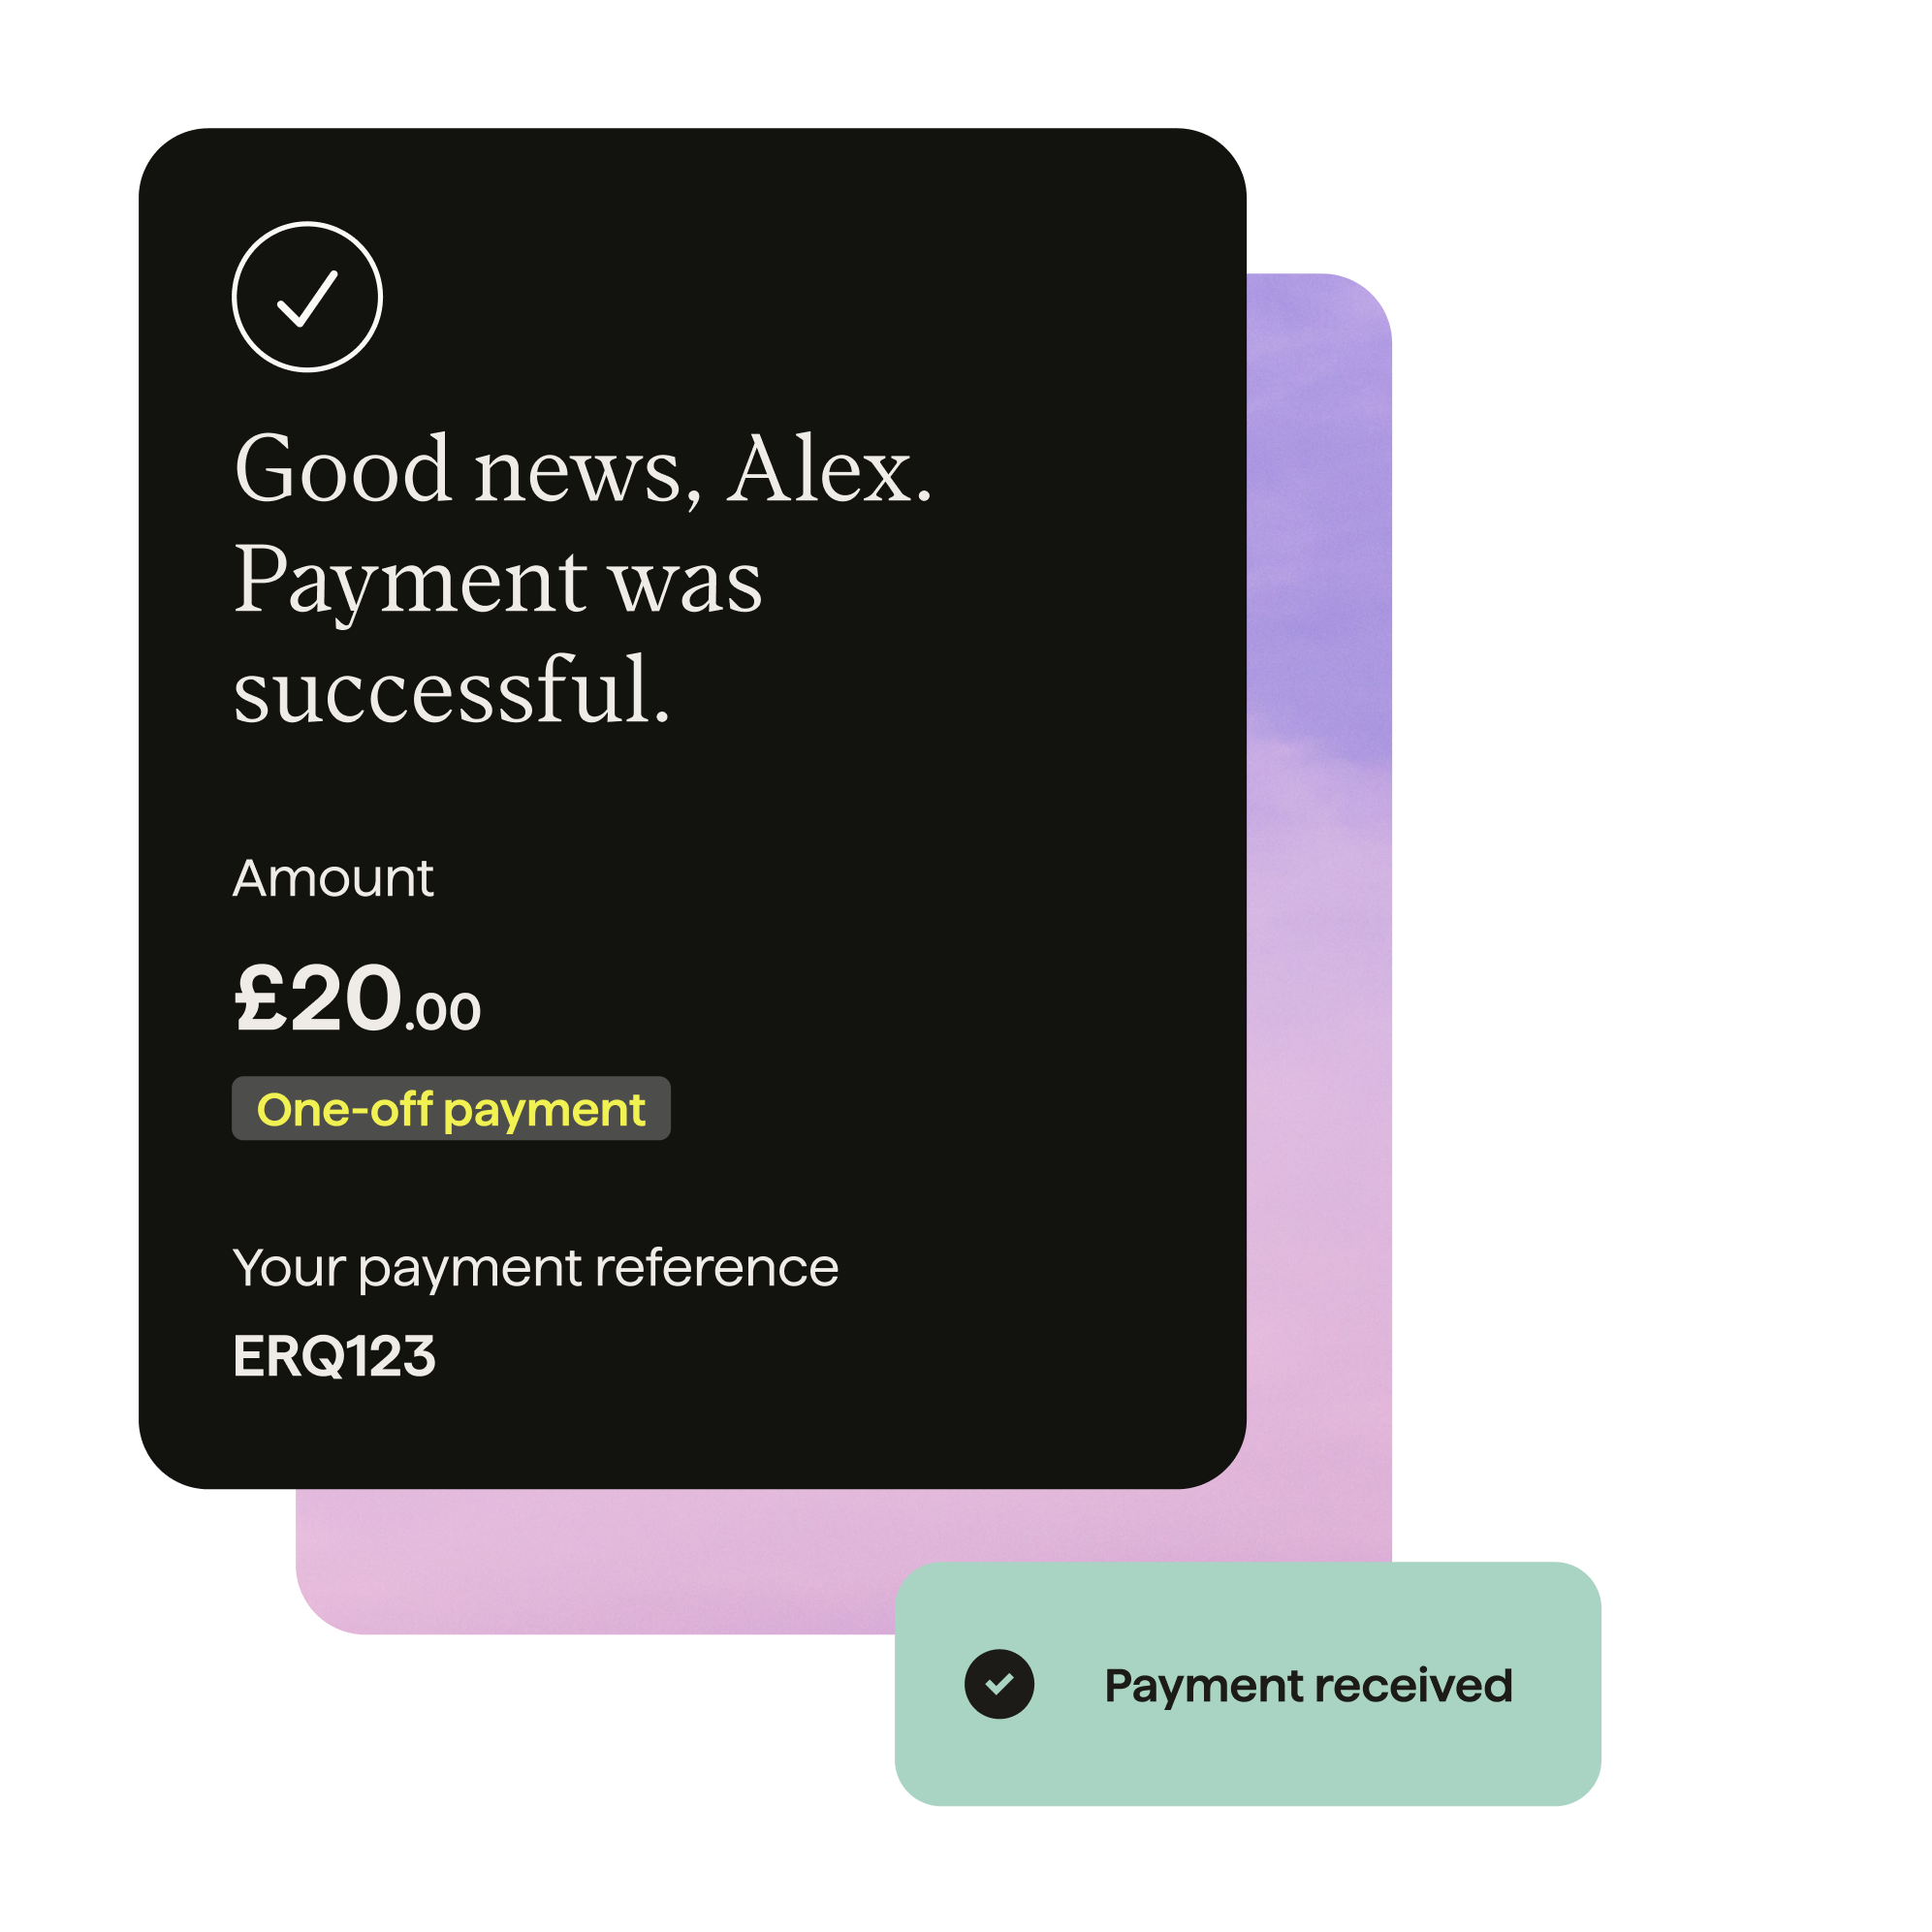 Now you can take one-off bank-to-bank payments instantly with GoCardless